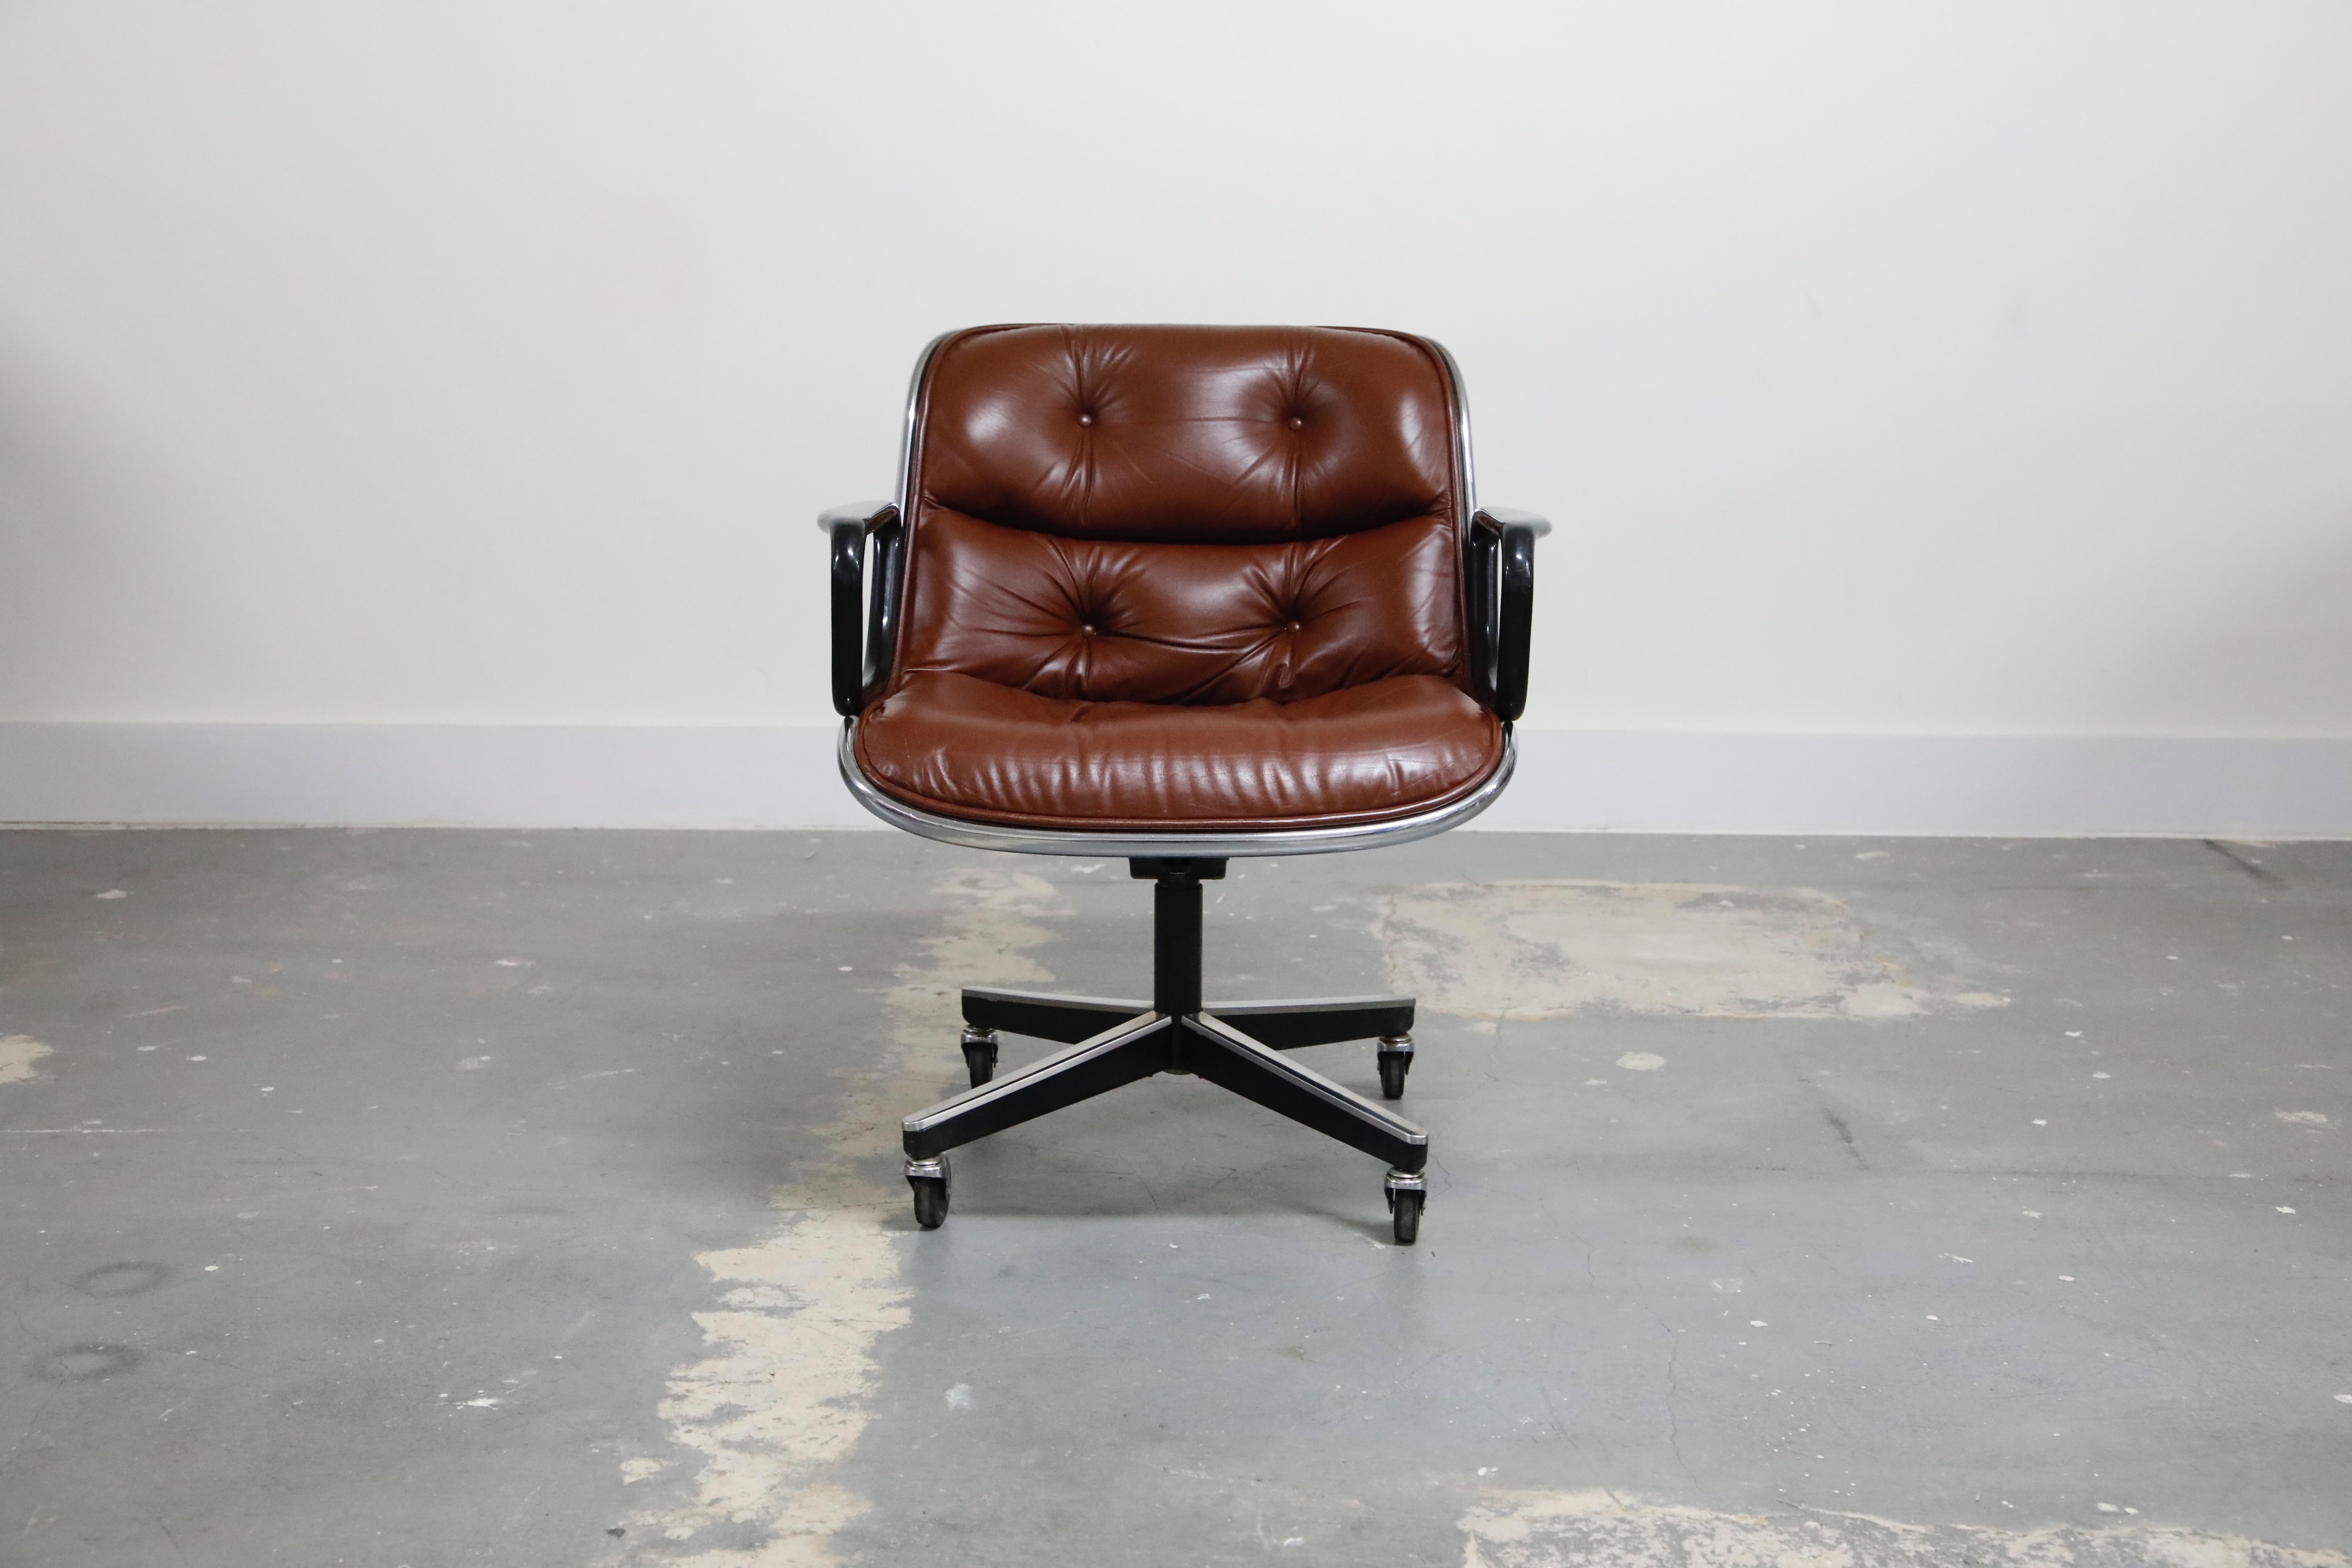 These Charles Pollock for Knoll International 'Executive Chairs' in a beautiful deep cognac colored leather with attractive light patina are early production examples from the earlier years of the design, making these a great option for collectors